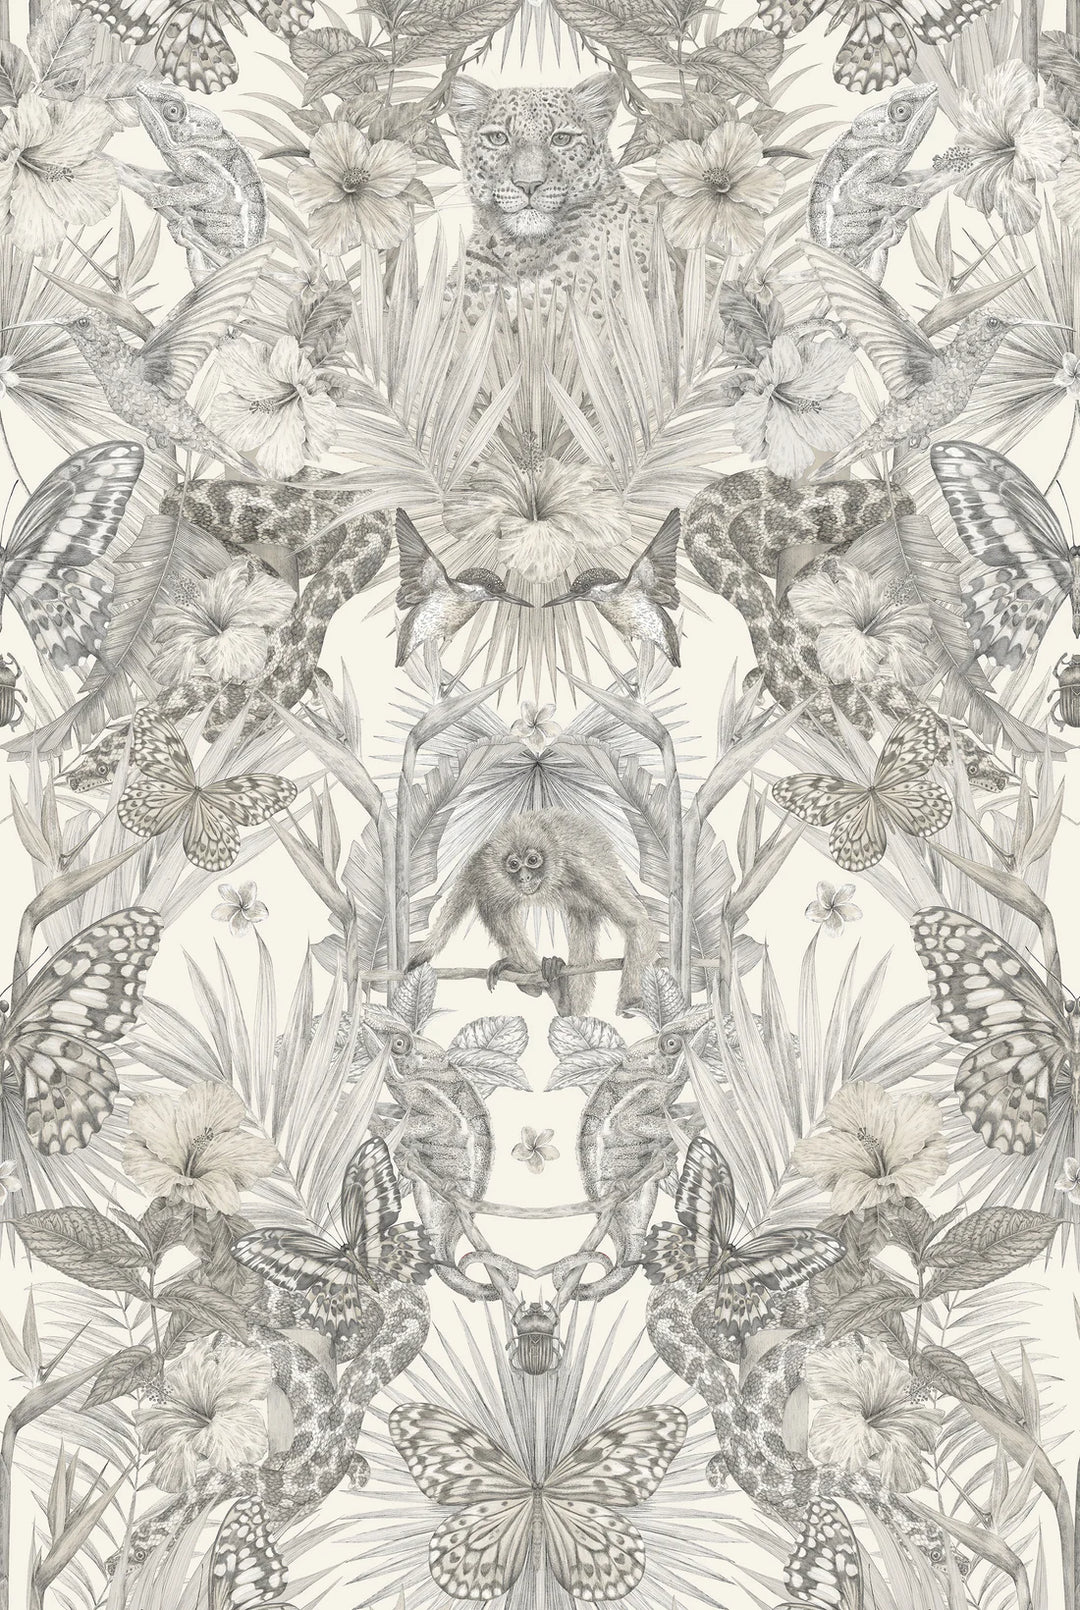 victoria-sanders-wallpaper-exotica-jungle-print-tigers-snakes-palms-orchids-birds-charcoal-handdrawn-illustrated-pattern-kalseidoscopic-repeat